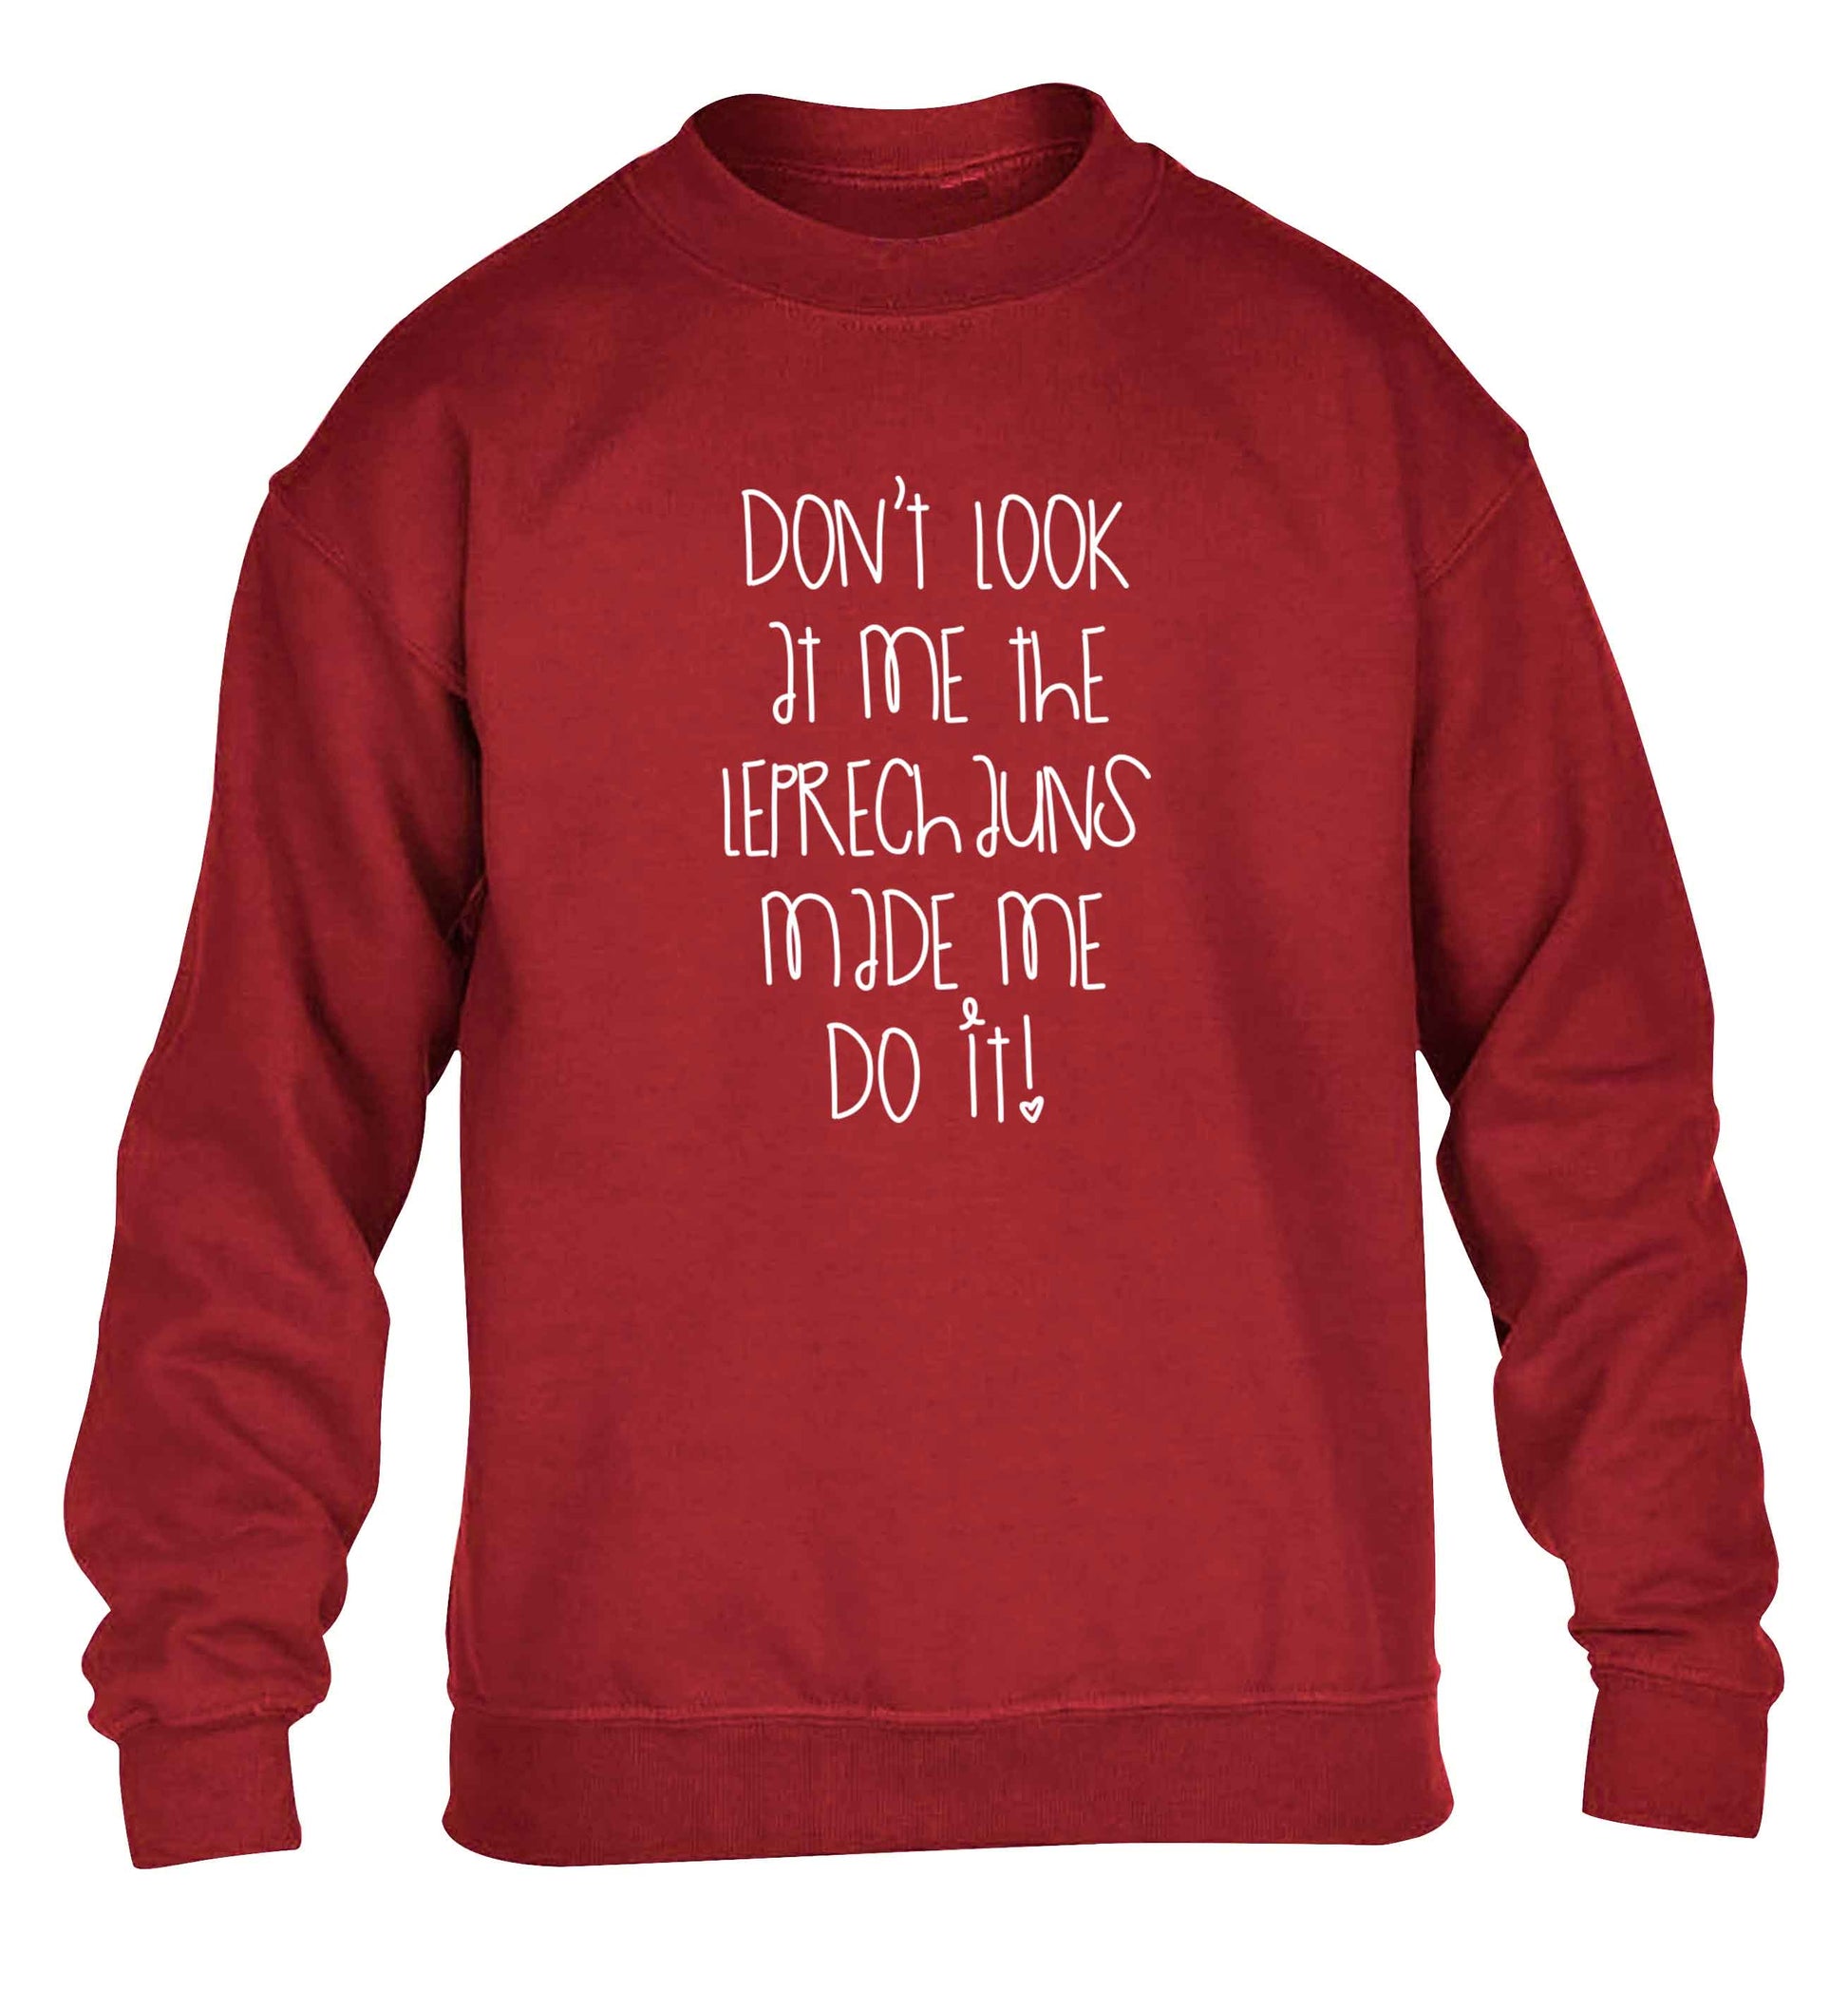 Don't look at me the leprechauns made me do it children's grey sweater 12-13 Years